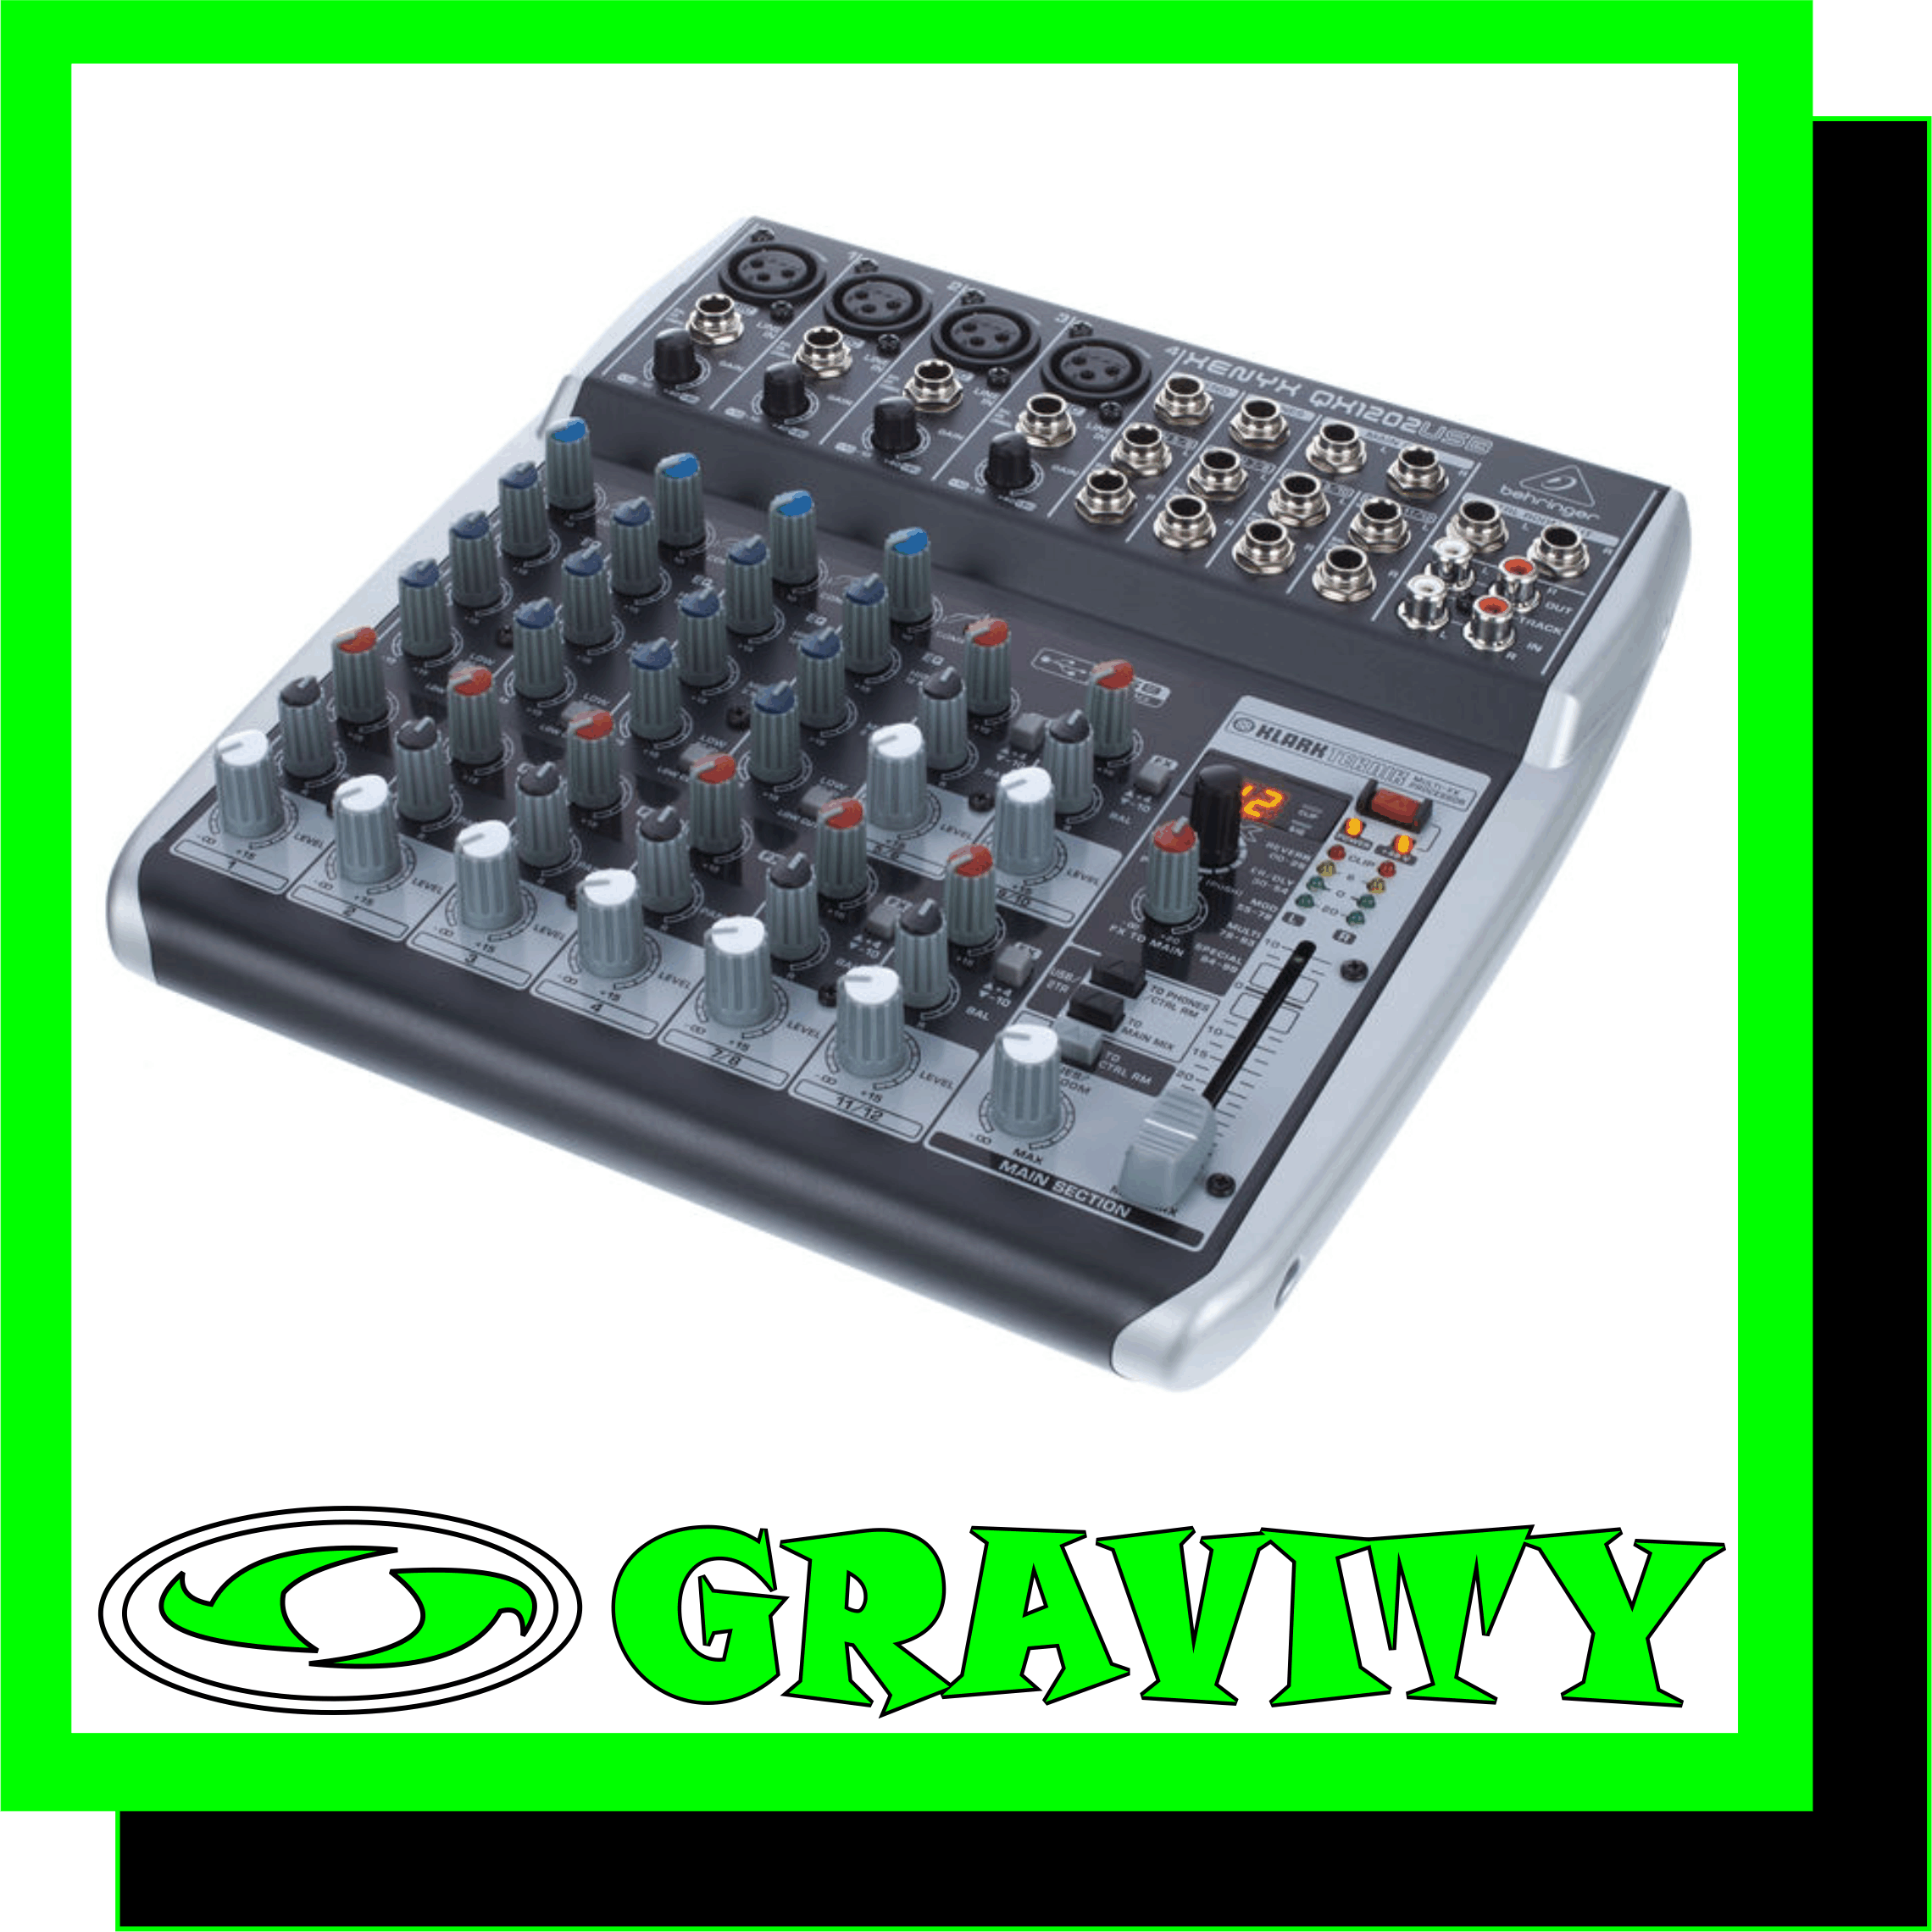 Behringer XENYX QX1202USB 12 input Mixer   Product Features: -Premium ultra-low noise, high headroom analog mixer -4 state-of-the-art XENYX Mic Preamps comparable to stand-alone boutique preamps -Studio-grade compressors with super-easy “one-knob” functionality and control -LED for professional vocal and instrumental sound -Ultra-high quality KLARK TEKNIK FX processor with 100 presets including reverb, -chorus, flanger, delay, pitch shifter and various multi-effects -Built-in stereo USB/Audio Interface to connect directly to your computer. Free -audio recording, editing and podcasting software plus 150 instrument/effect -plug-ins downloadable at behringer.com -Neo-classic “British” 3-band EQs for warm and musical sound -FX send control per channel for internal FX processor and/or as external send -Main mix outputs plus separate control room, phones and 2-Track outputs -2-Track inputs assignable to main mix or control room/phones outputs -High-quality components and exceptionally rugged construction ensure long life -Conceived and designed by BEHRINGER Germany  The compact QX1202USB mixer allows you to effortlessly achieve premium-quality sound, thanks to its 4 onboard studio-grade XENYX Mic Preamps and ultra-musical British channel EQs. And our easy-to-use one-knob compressors provide total dynamic control for the ultimate in punch and clarity, while respecting all the power and emotion you pack into every note. Add to this, the sweet forgiveness of our British-style EQs and a KLARK TEKNIK 24-bit, dual engine FX processor with 100 presets including reverb, chorus, flanger, delay, pitch shifter and various multi-effects and the QX1202USB becomes an incredibly versatile mixer for your live performances. But the XENYX QX1202USB isnt just designed to handle your live gigs; they also provide the state-of-the-art tools you need to make stunning, professional-quality recordings. Along with their built-in USB/audio interfaces, the QX1202USB comes with all the recording and editing software needed to turn your computer system into a complete, high-performance home recording studio.